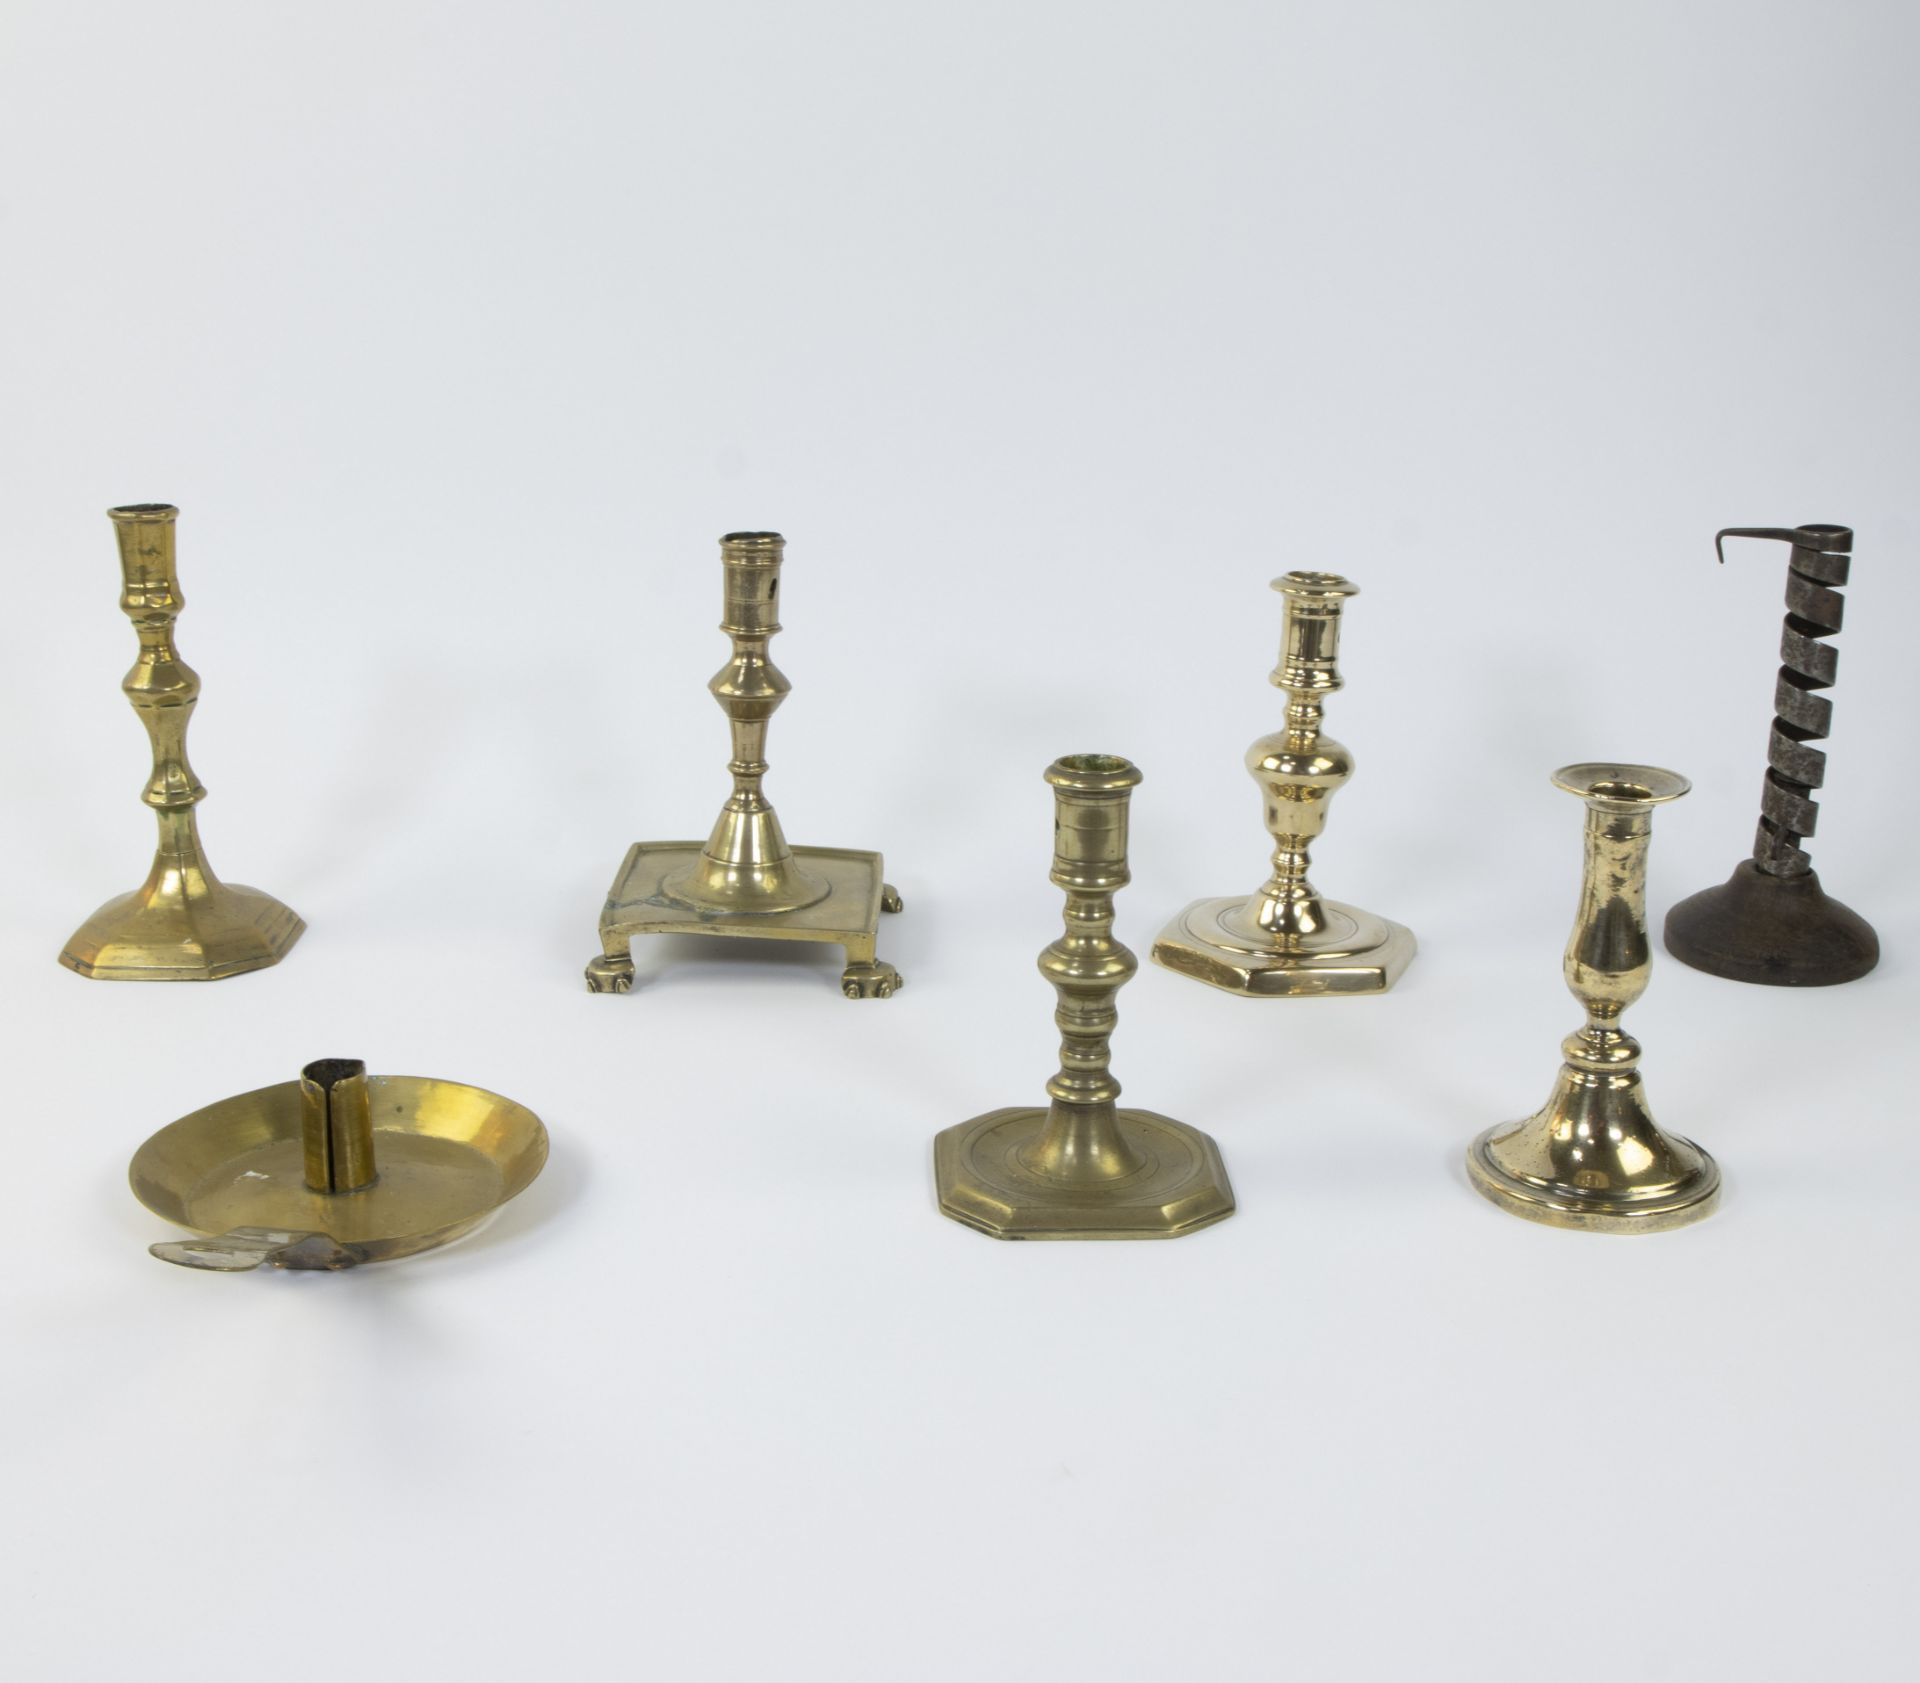 Collection of candlesticks, brass and iron, 17th/18th century, Western European (Spanish, French, Du - Image 3 of 4